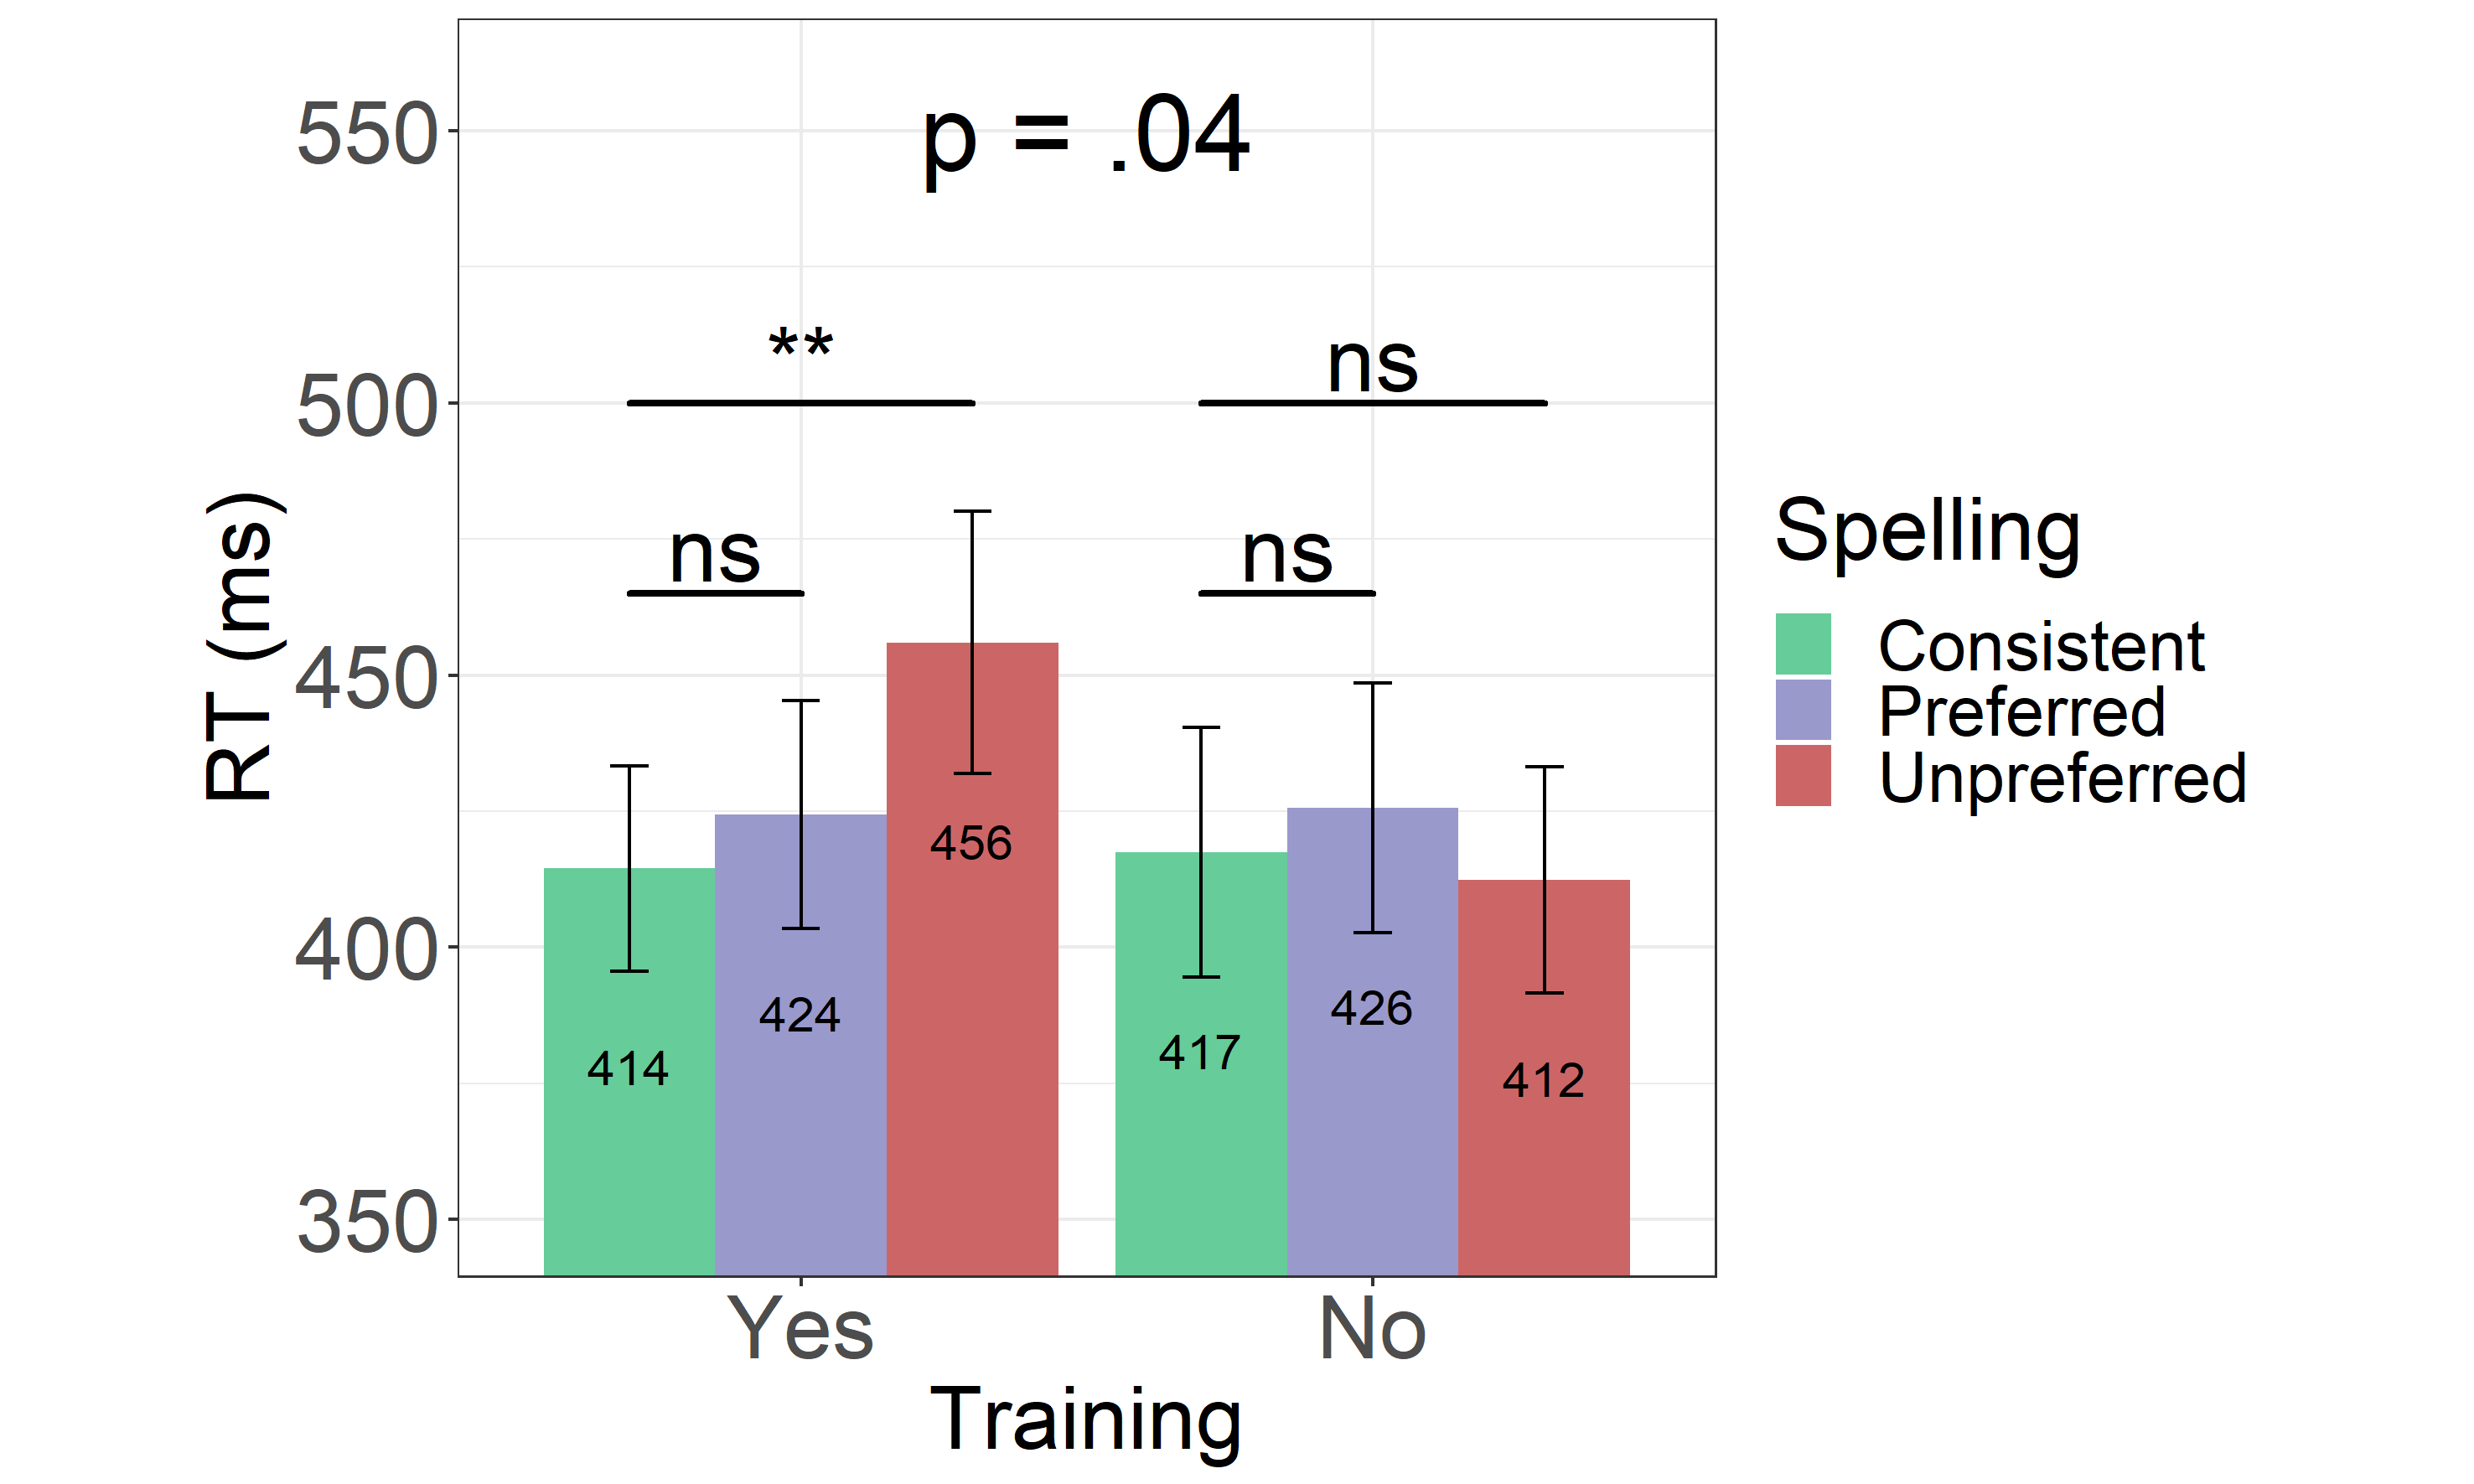 Reaction Times From the Experiment 1. Reaction times for for both trained (Yes) and untrained (No) consistent, preferred and unpreferred word spellings. Error bars represent the standard error of the mean.